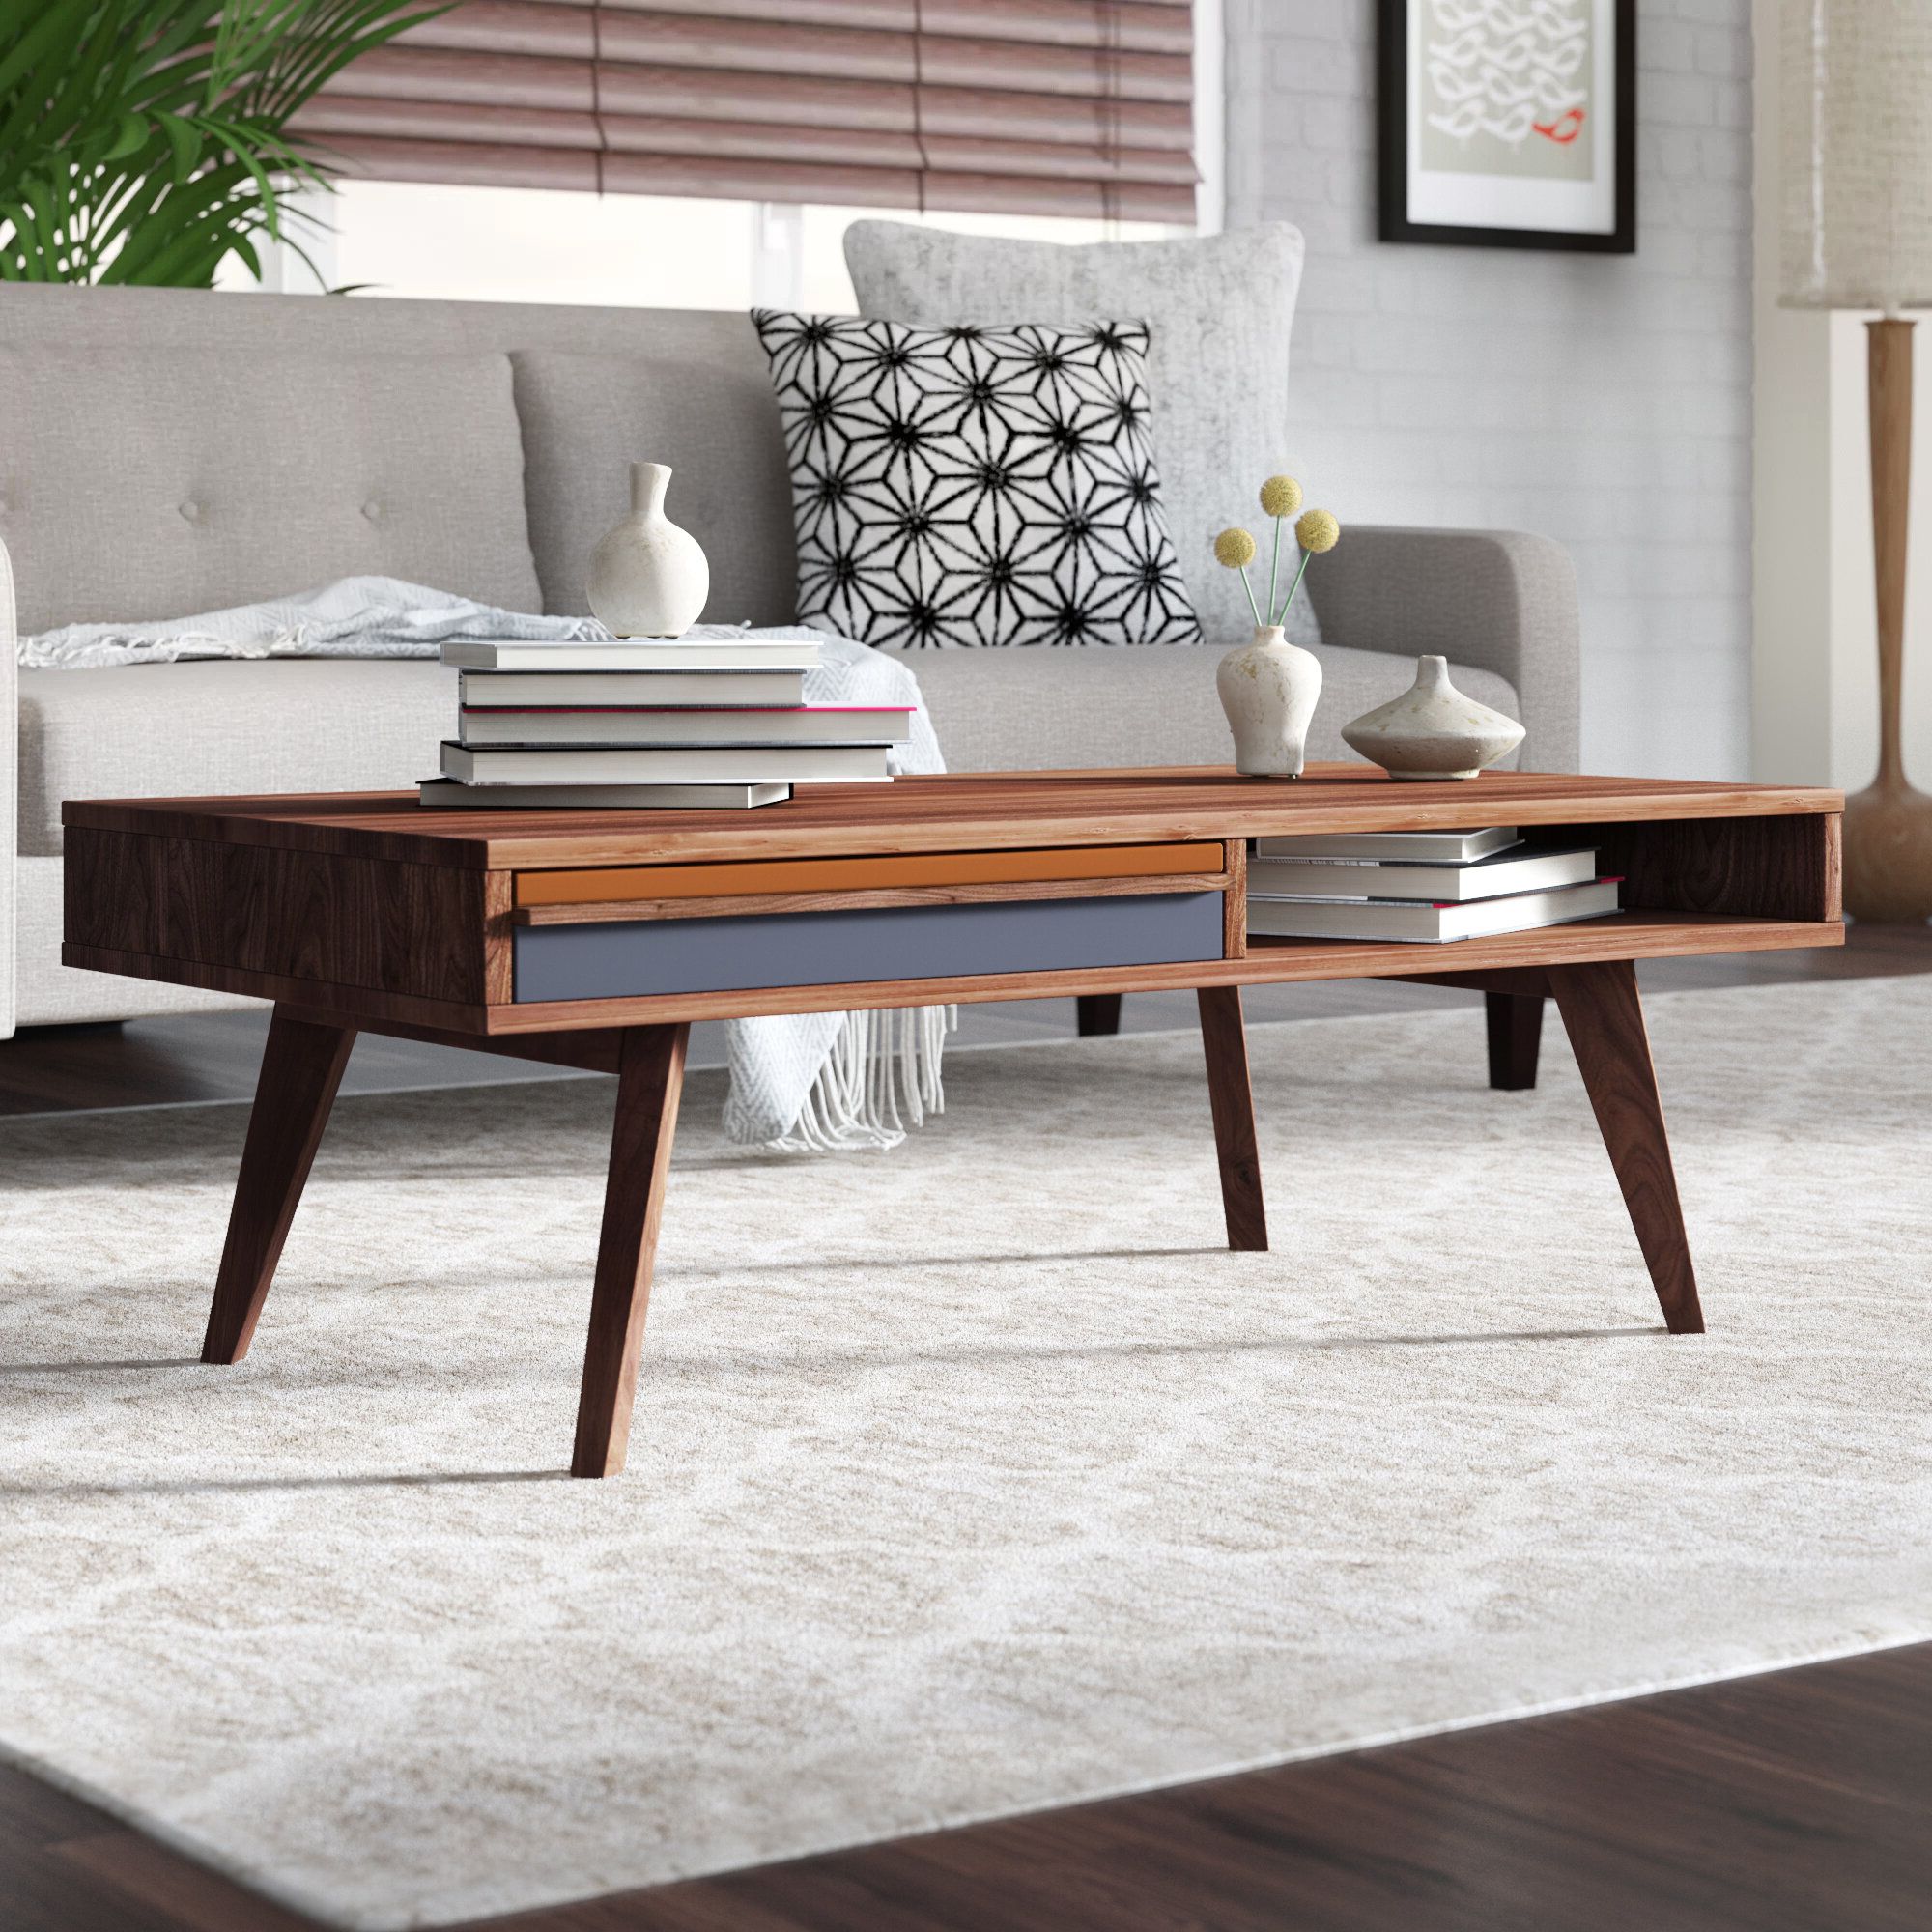 Mid Century Modern Coffee Table – Ideas On Foter Pertaining To Mid Century Modern Coffee Tables (Gallery 3 of 20)